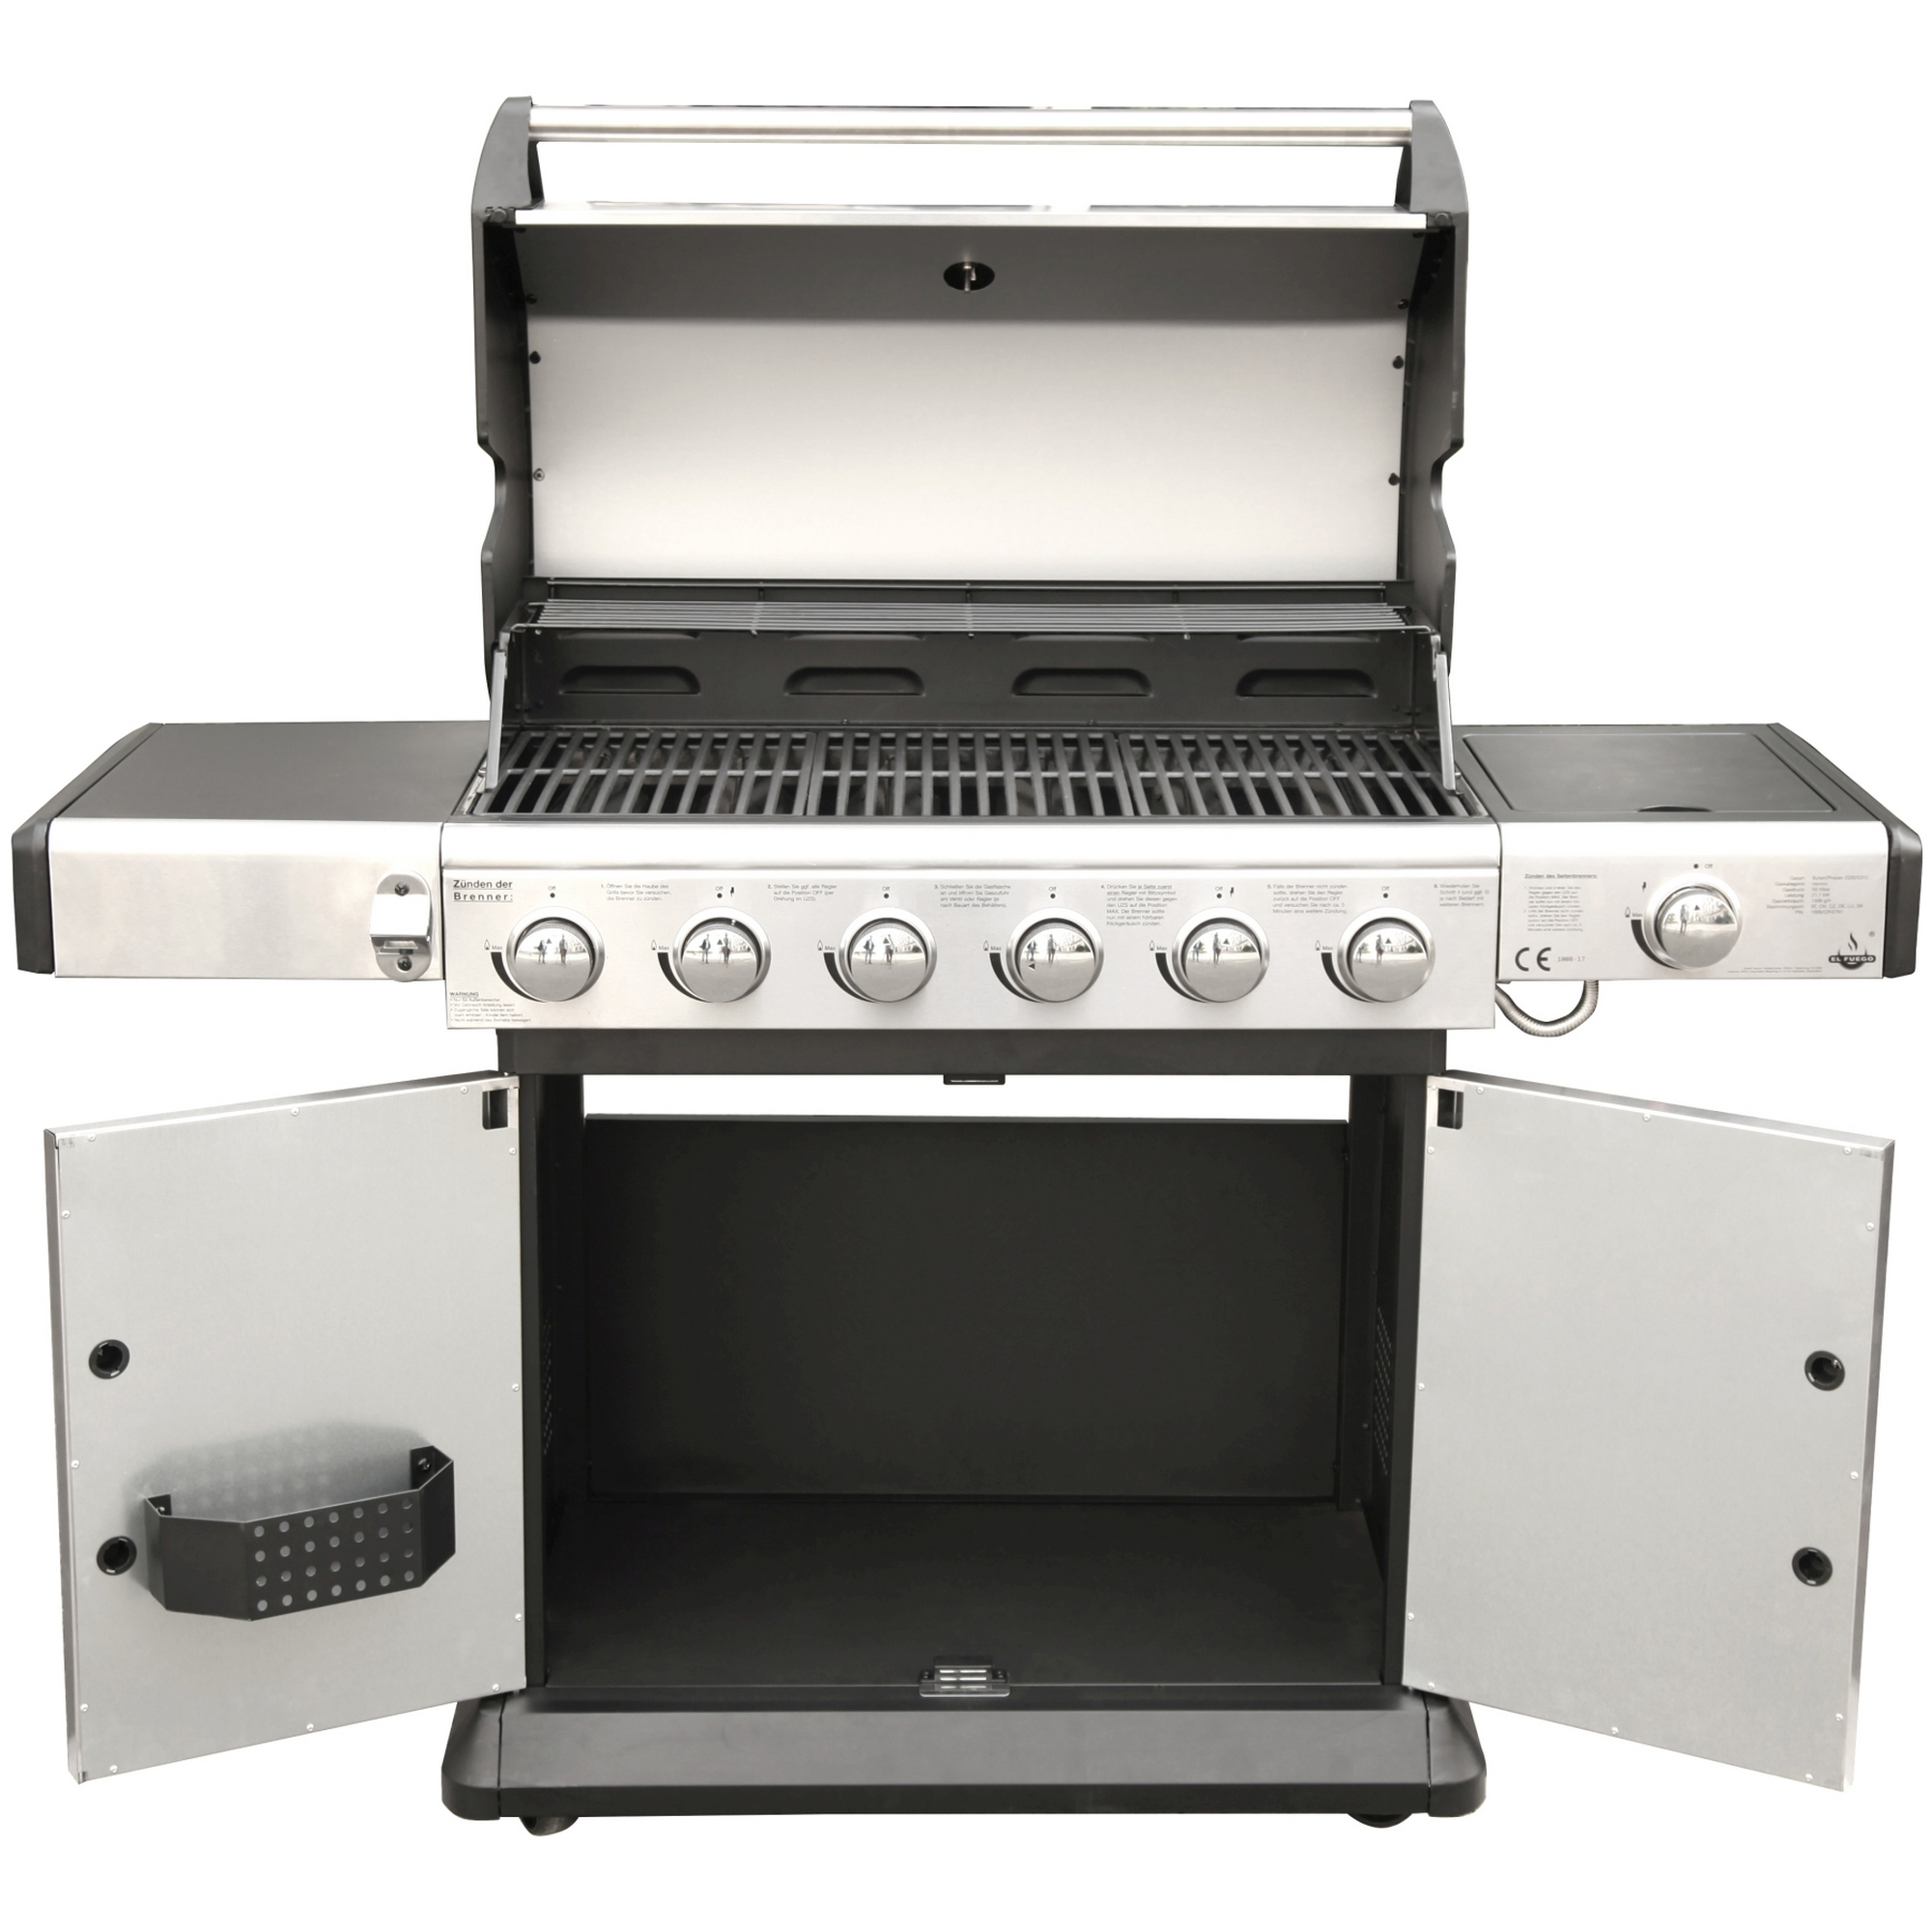 Gasgrill 'Deluxe' schwarz/silber 112 x 148 x 56 cm + product picture